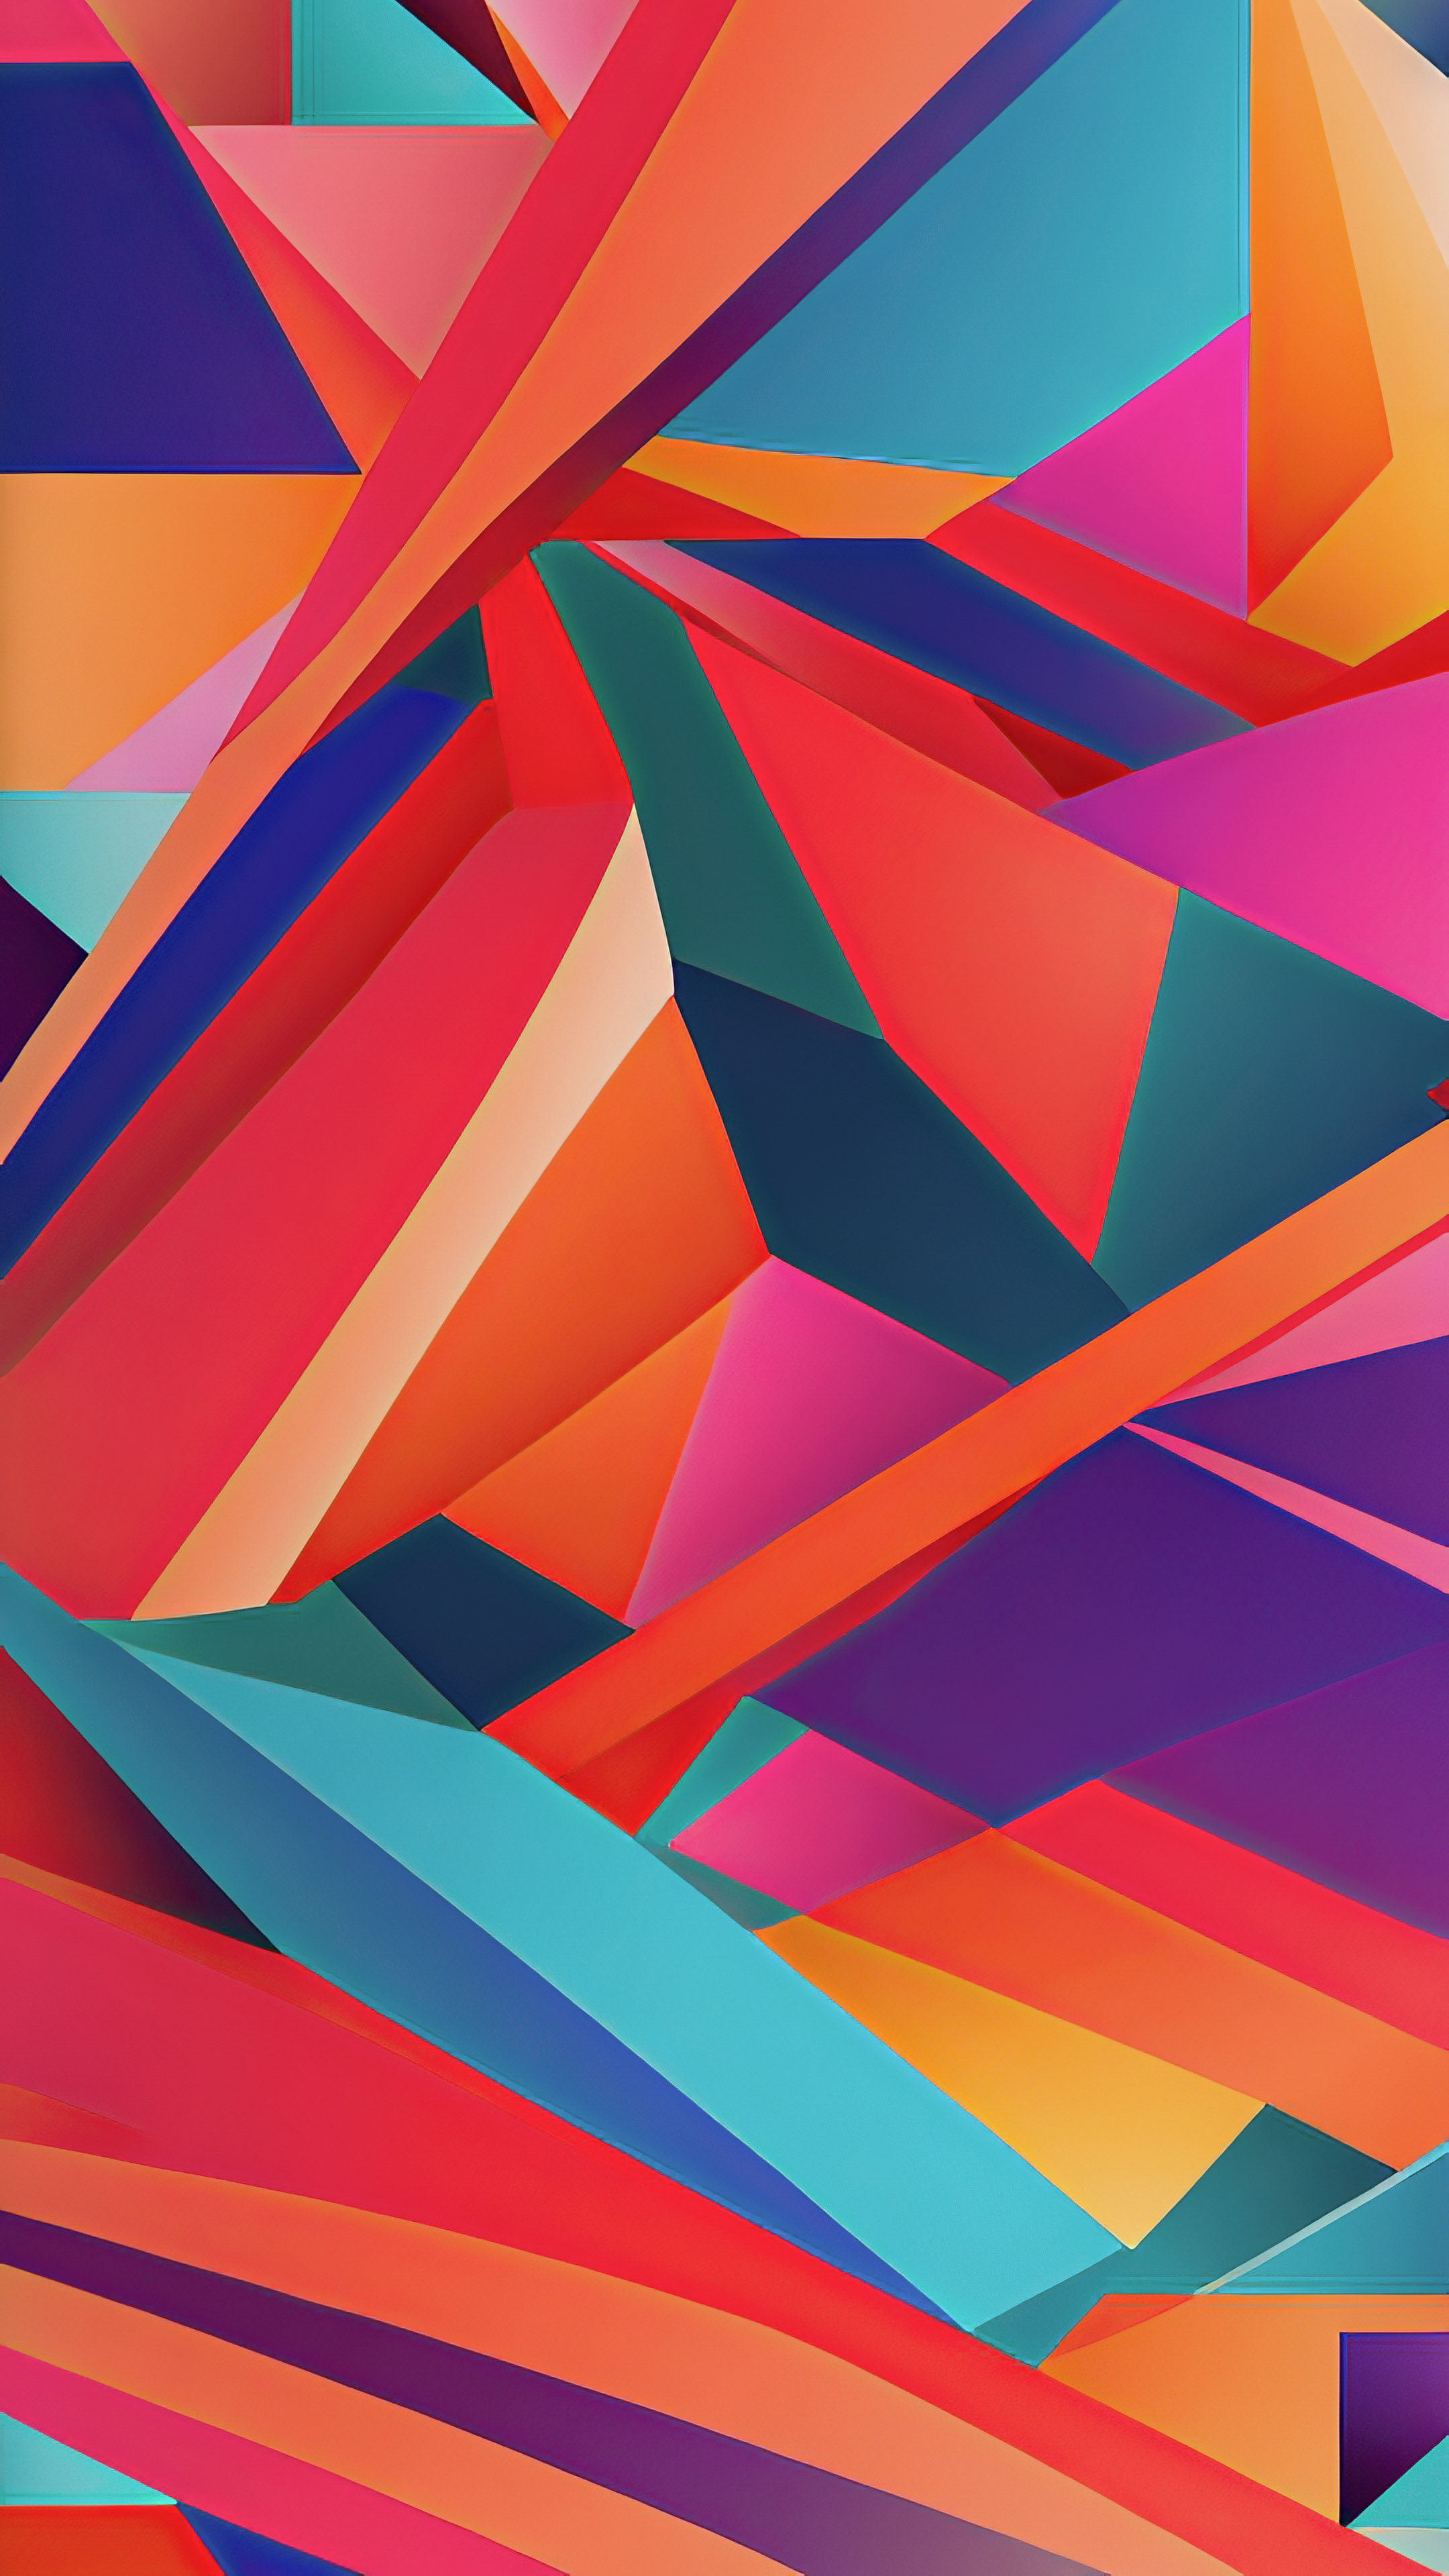 Dive into a world of vibrant hues with abstract wallpaper 4k, showcasing colorful geometric shapes in contrasting brilliance.